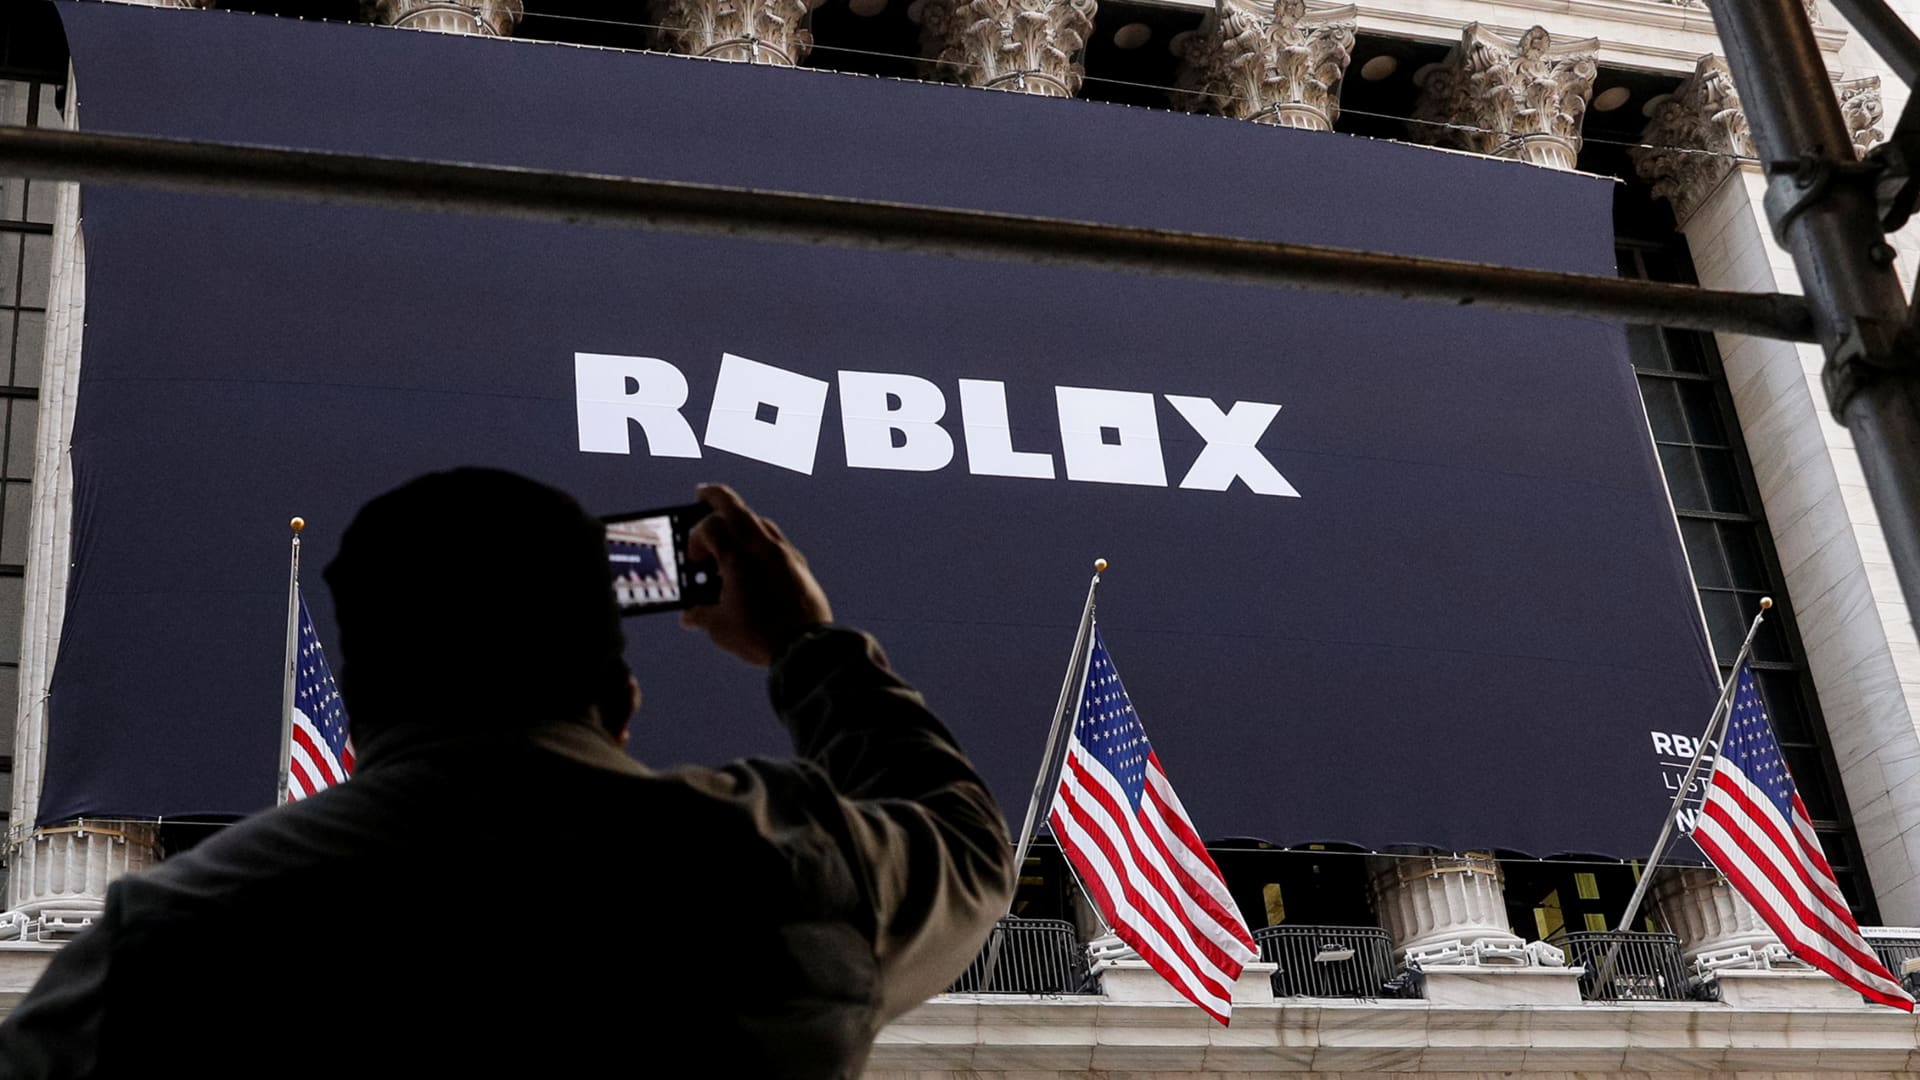 Roblox stock up after December update shows increase in bookings